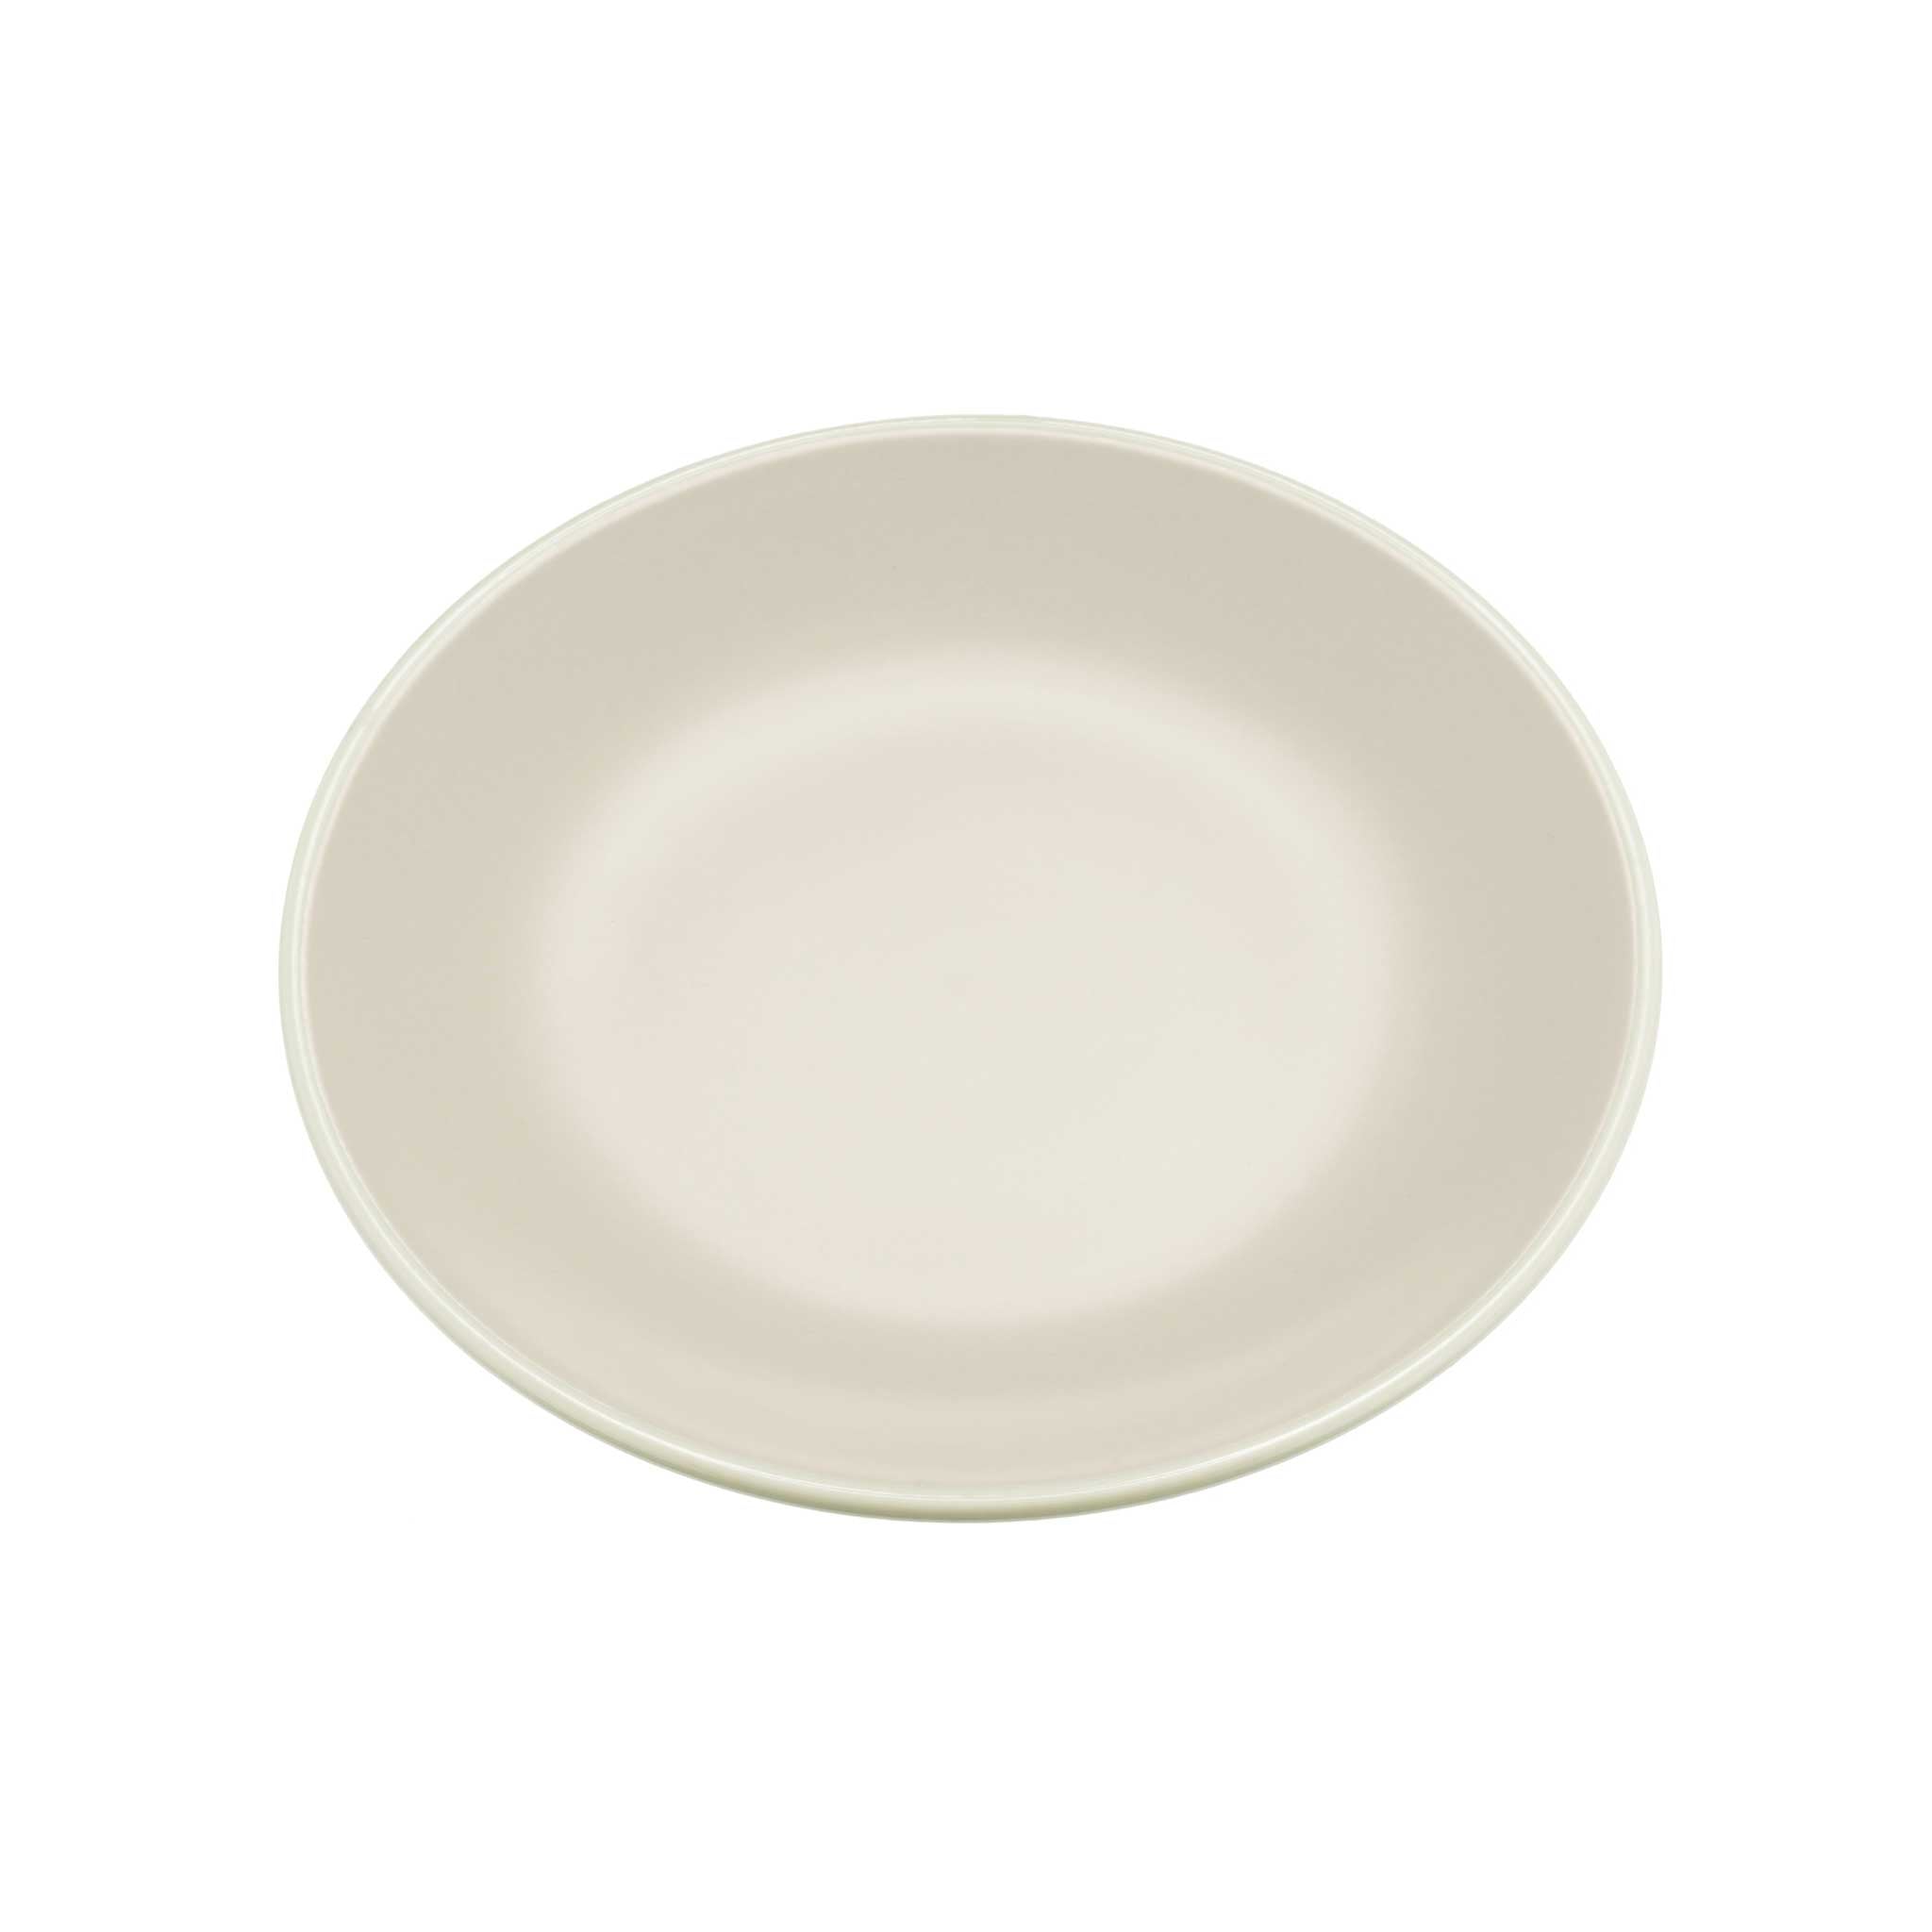 Sand Bread Plate from China Blue